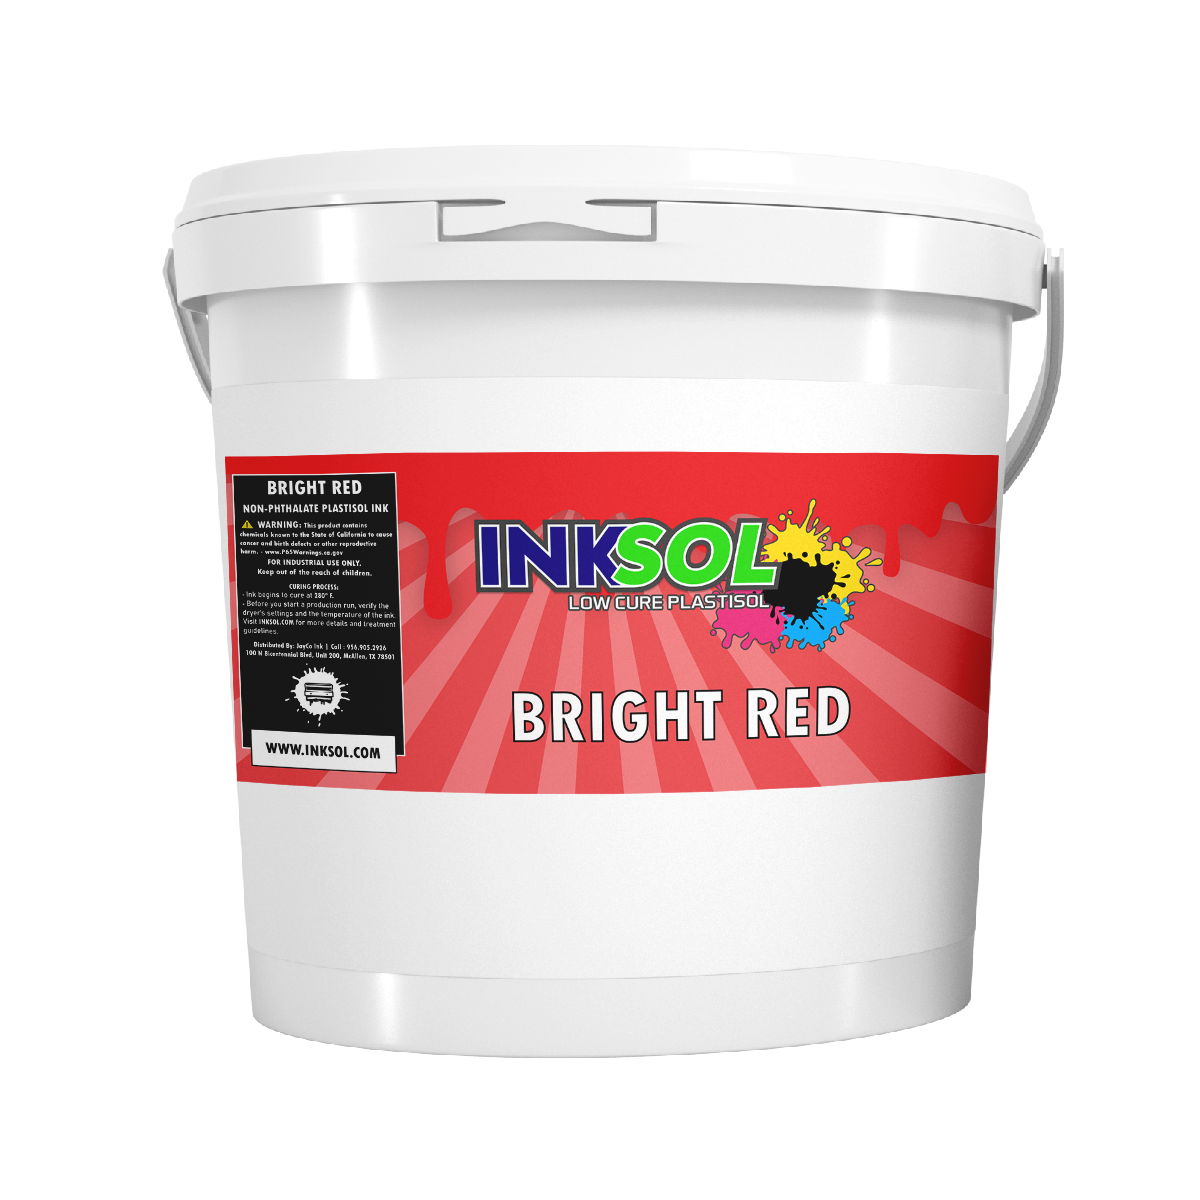 InkSol™ Low Cure Plastisol Bright Red